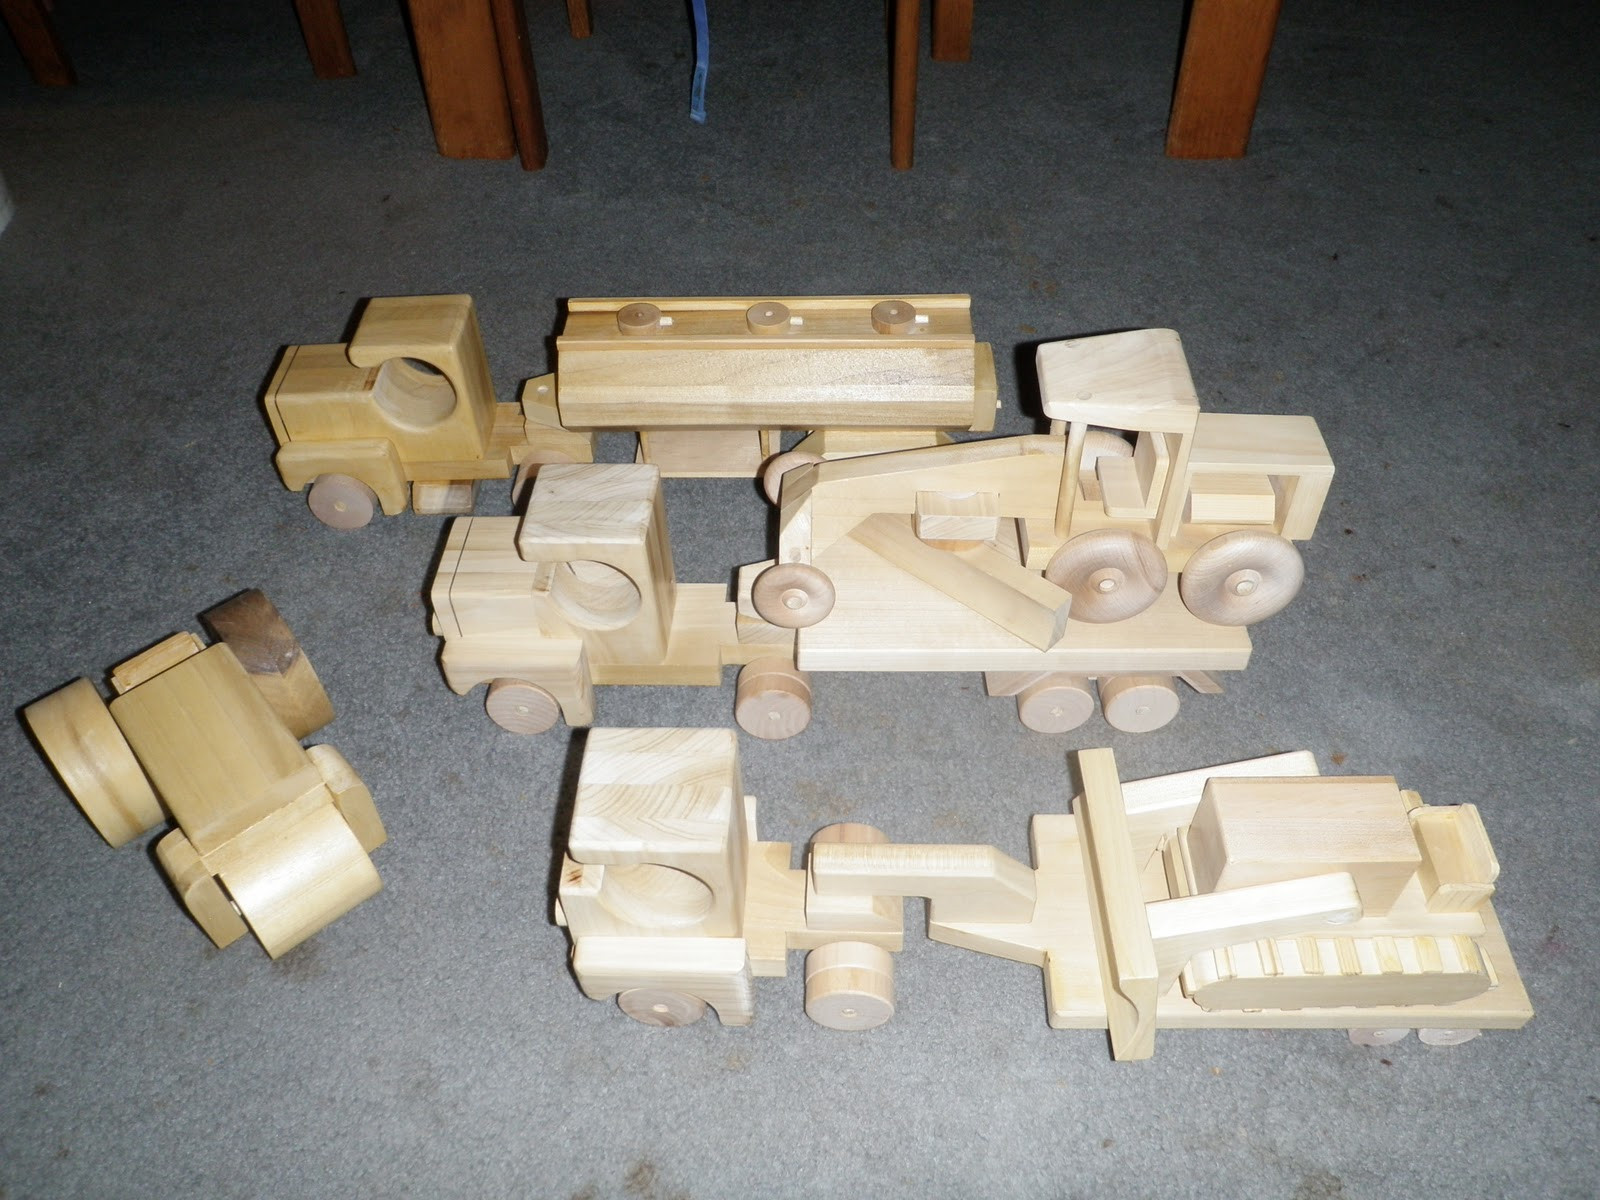 DIY Wooden Toys Plans
 Wooden Toy Truck Plans